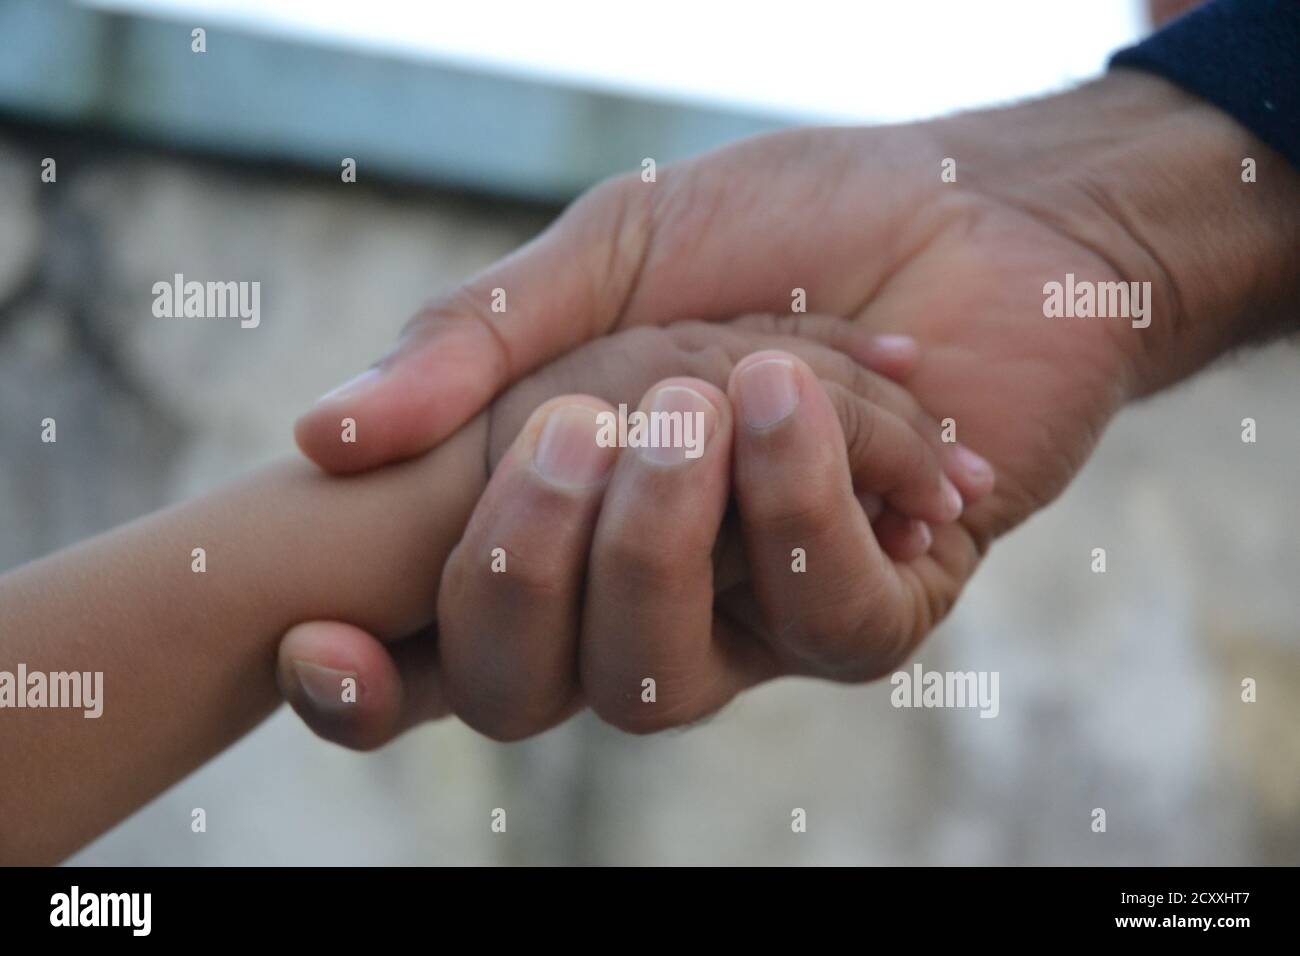 Different hand gestures. Human hands with different objects caring and carrying them. Stock Photo